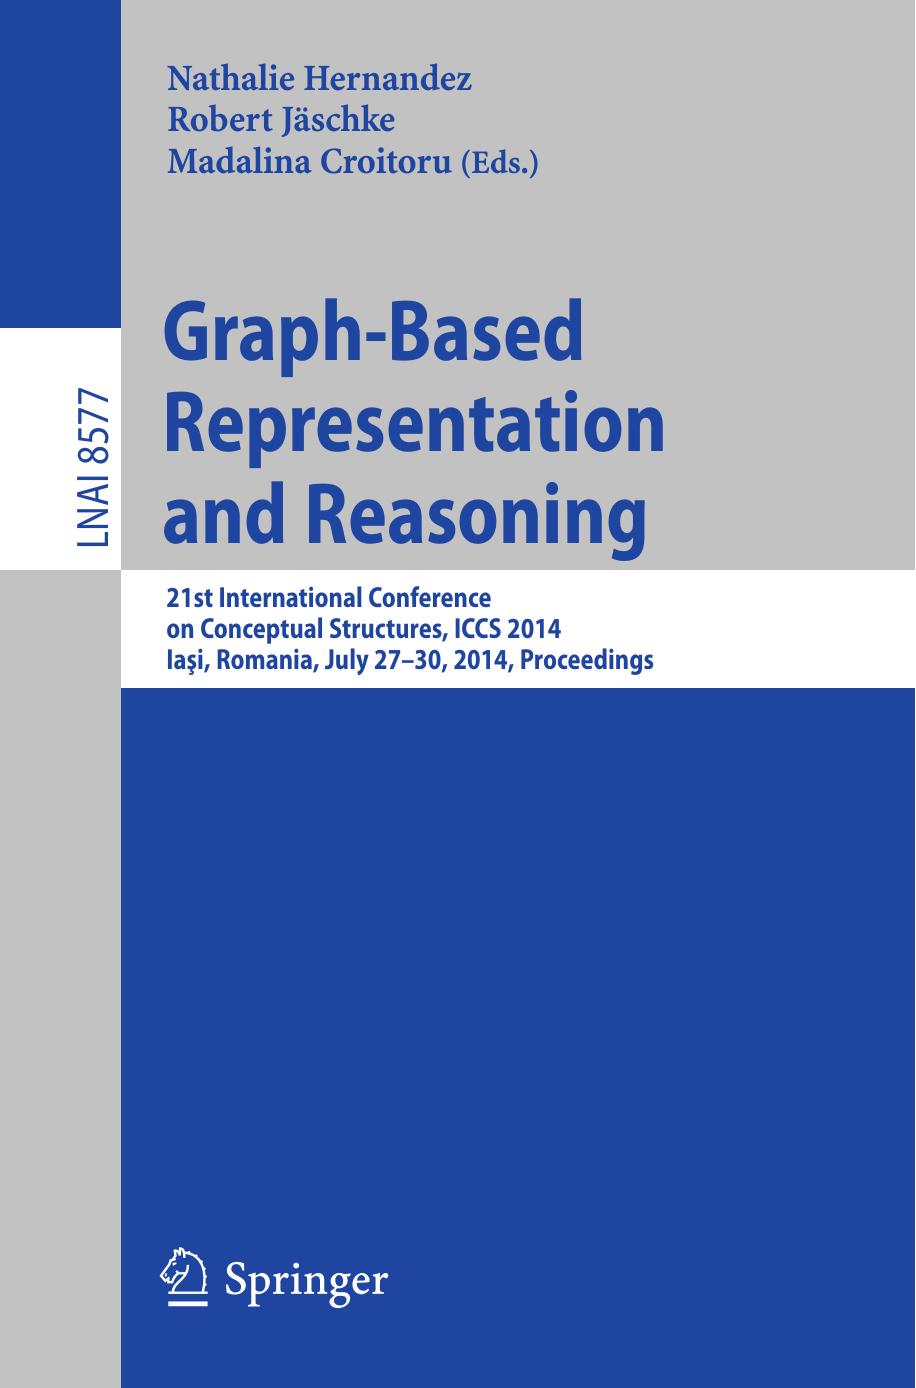 Graph-Based Representation and Reasoning: 21st International Conference on Conceptual Structures, ICCS 2014, Iaşi, Romania, July 27-30, 2014, Proceedings